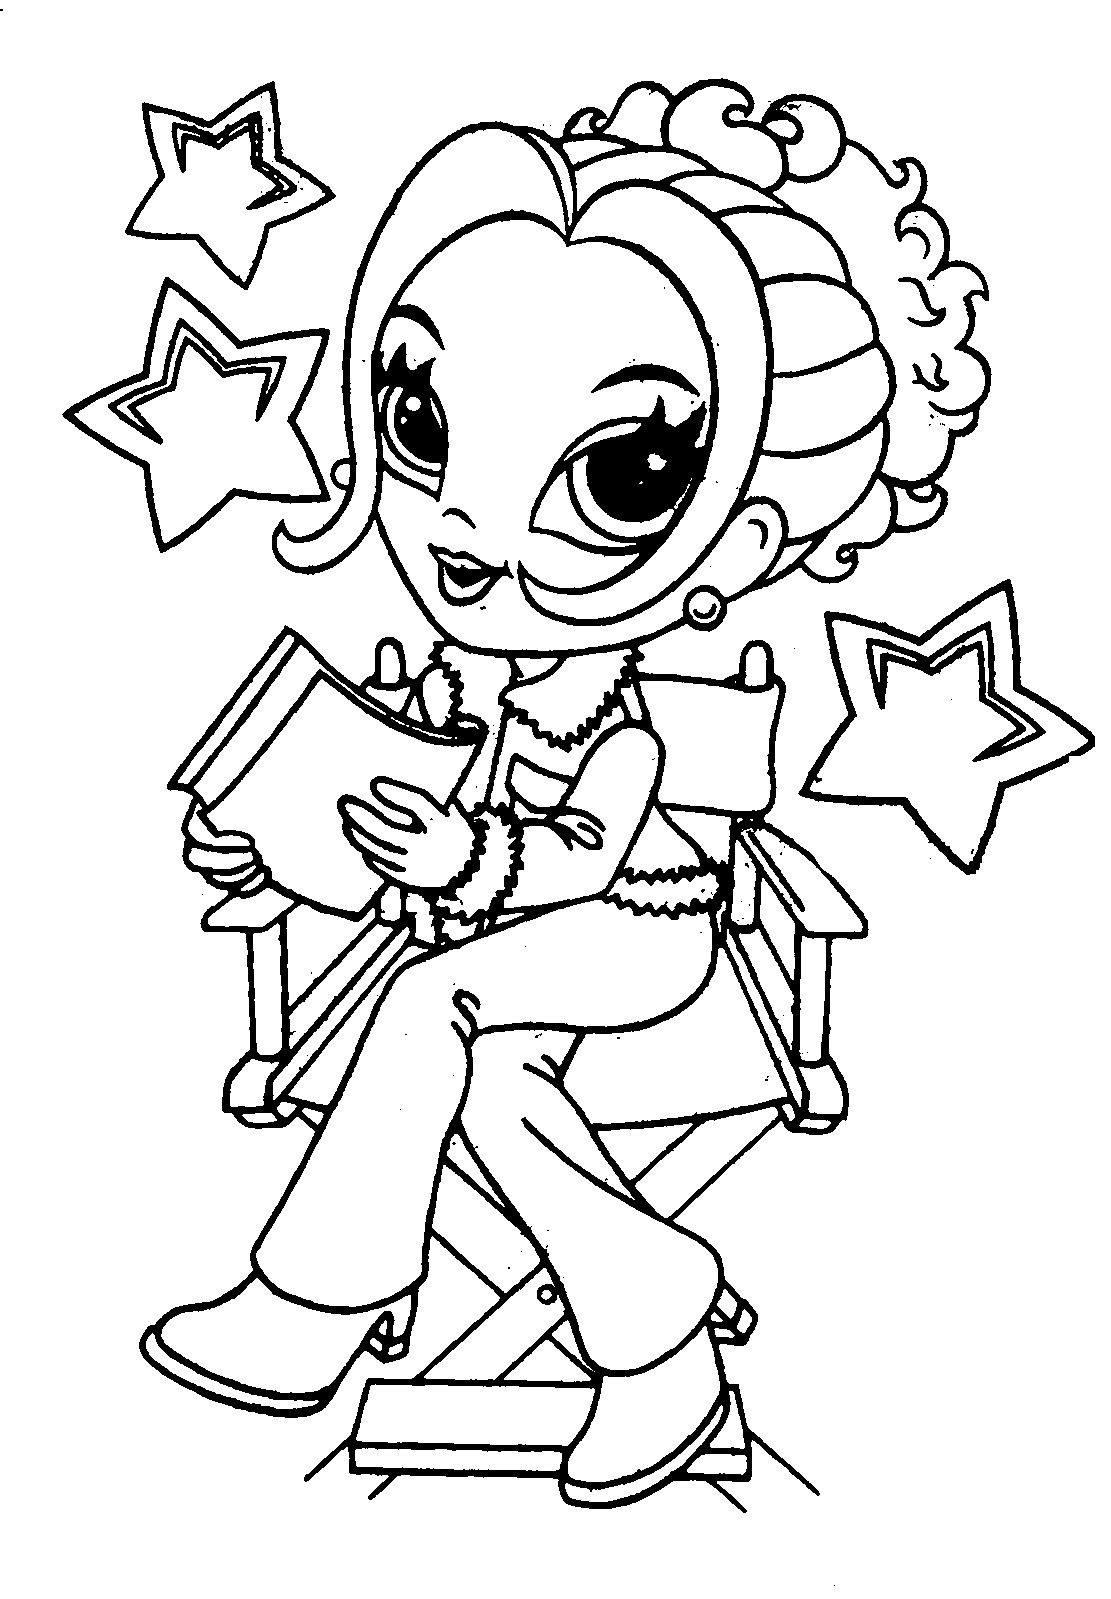 Middle School Coloring Pages
 Coloring Pages For Middle School Students Coloring Home